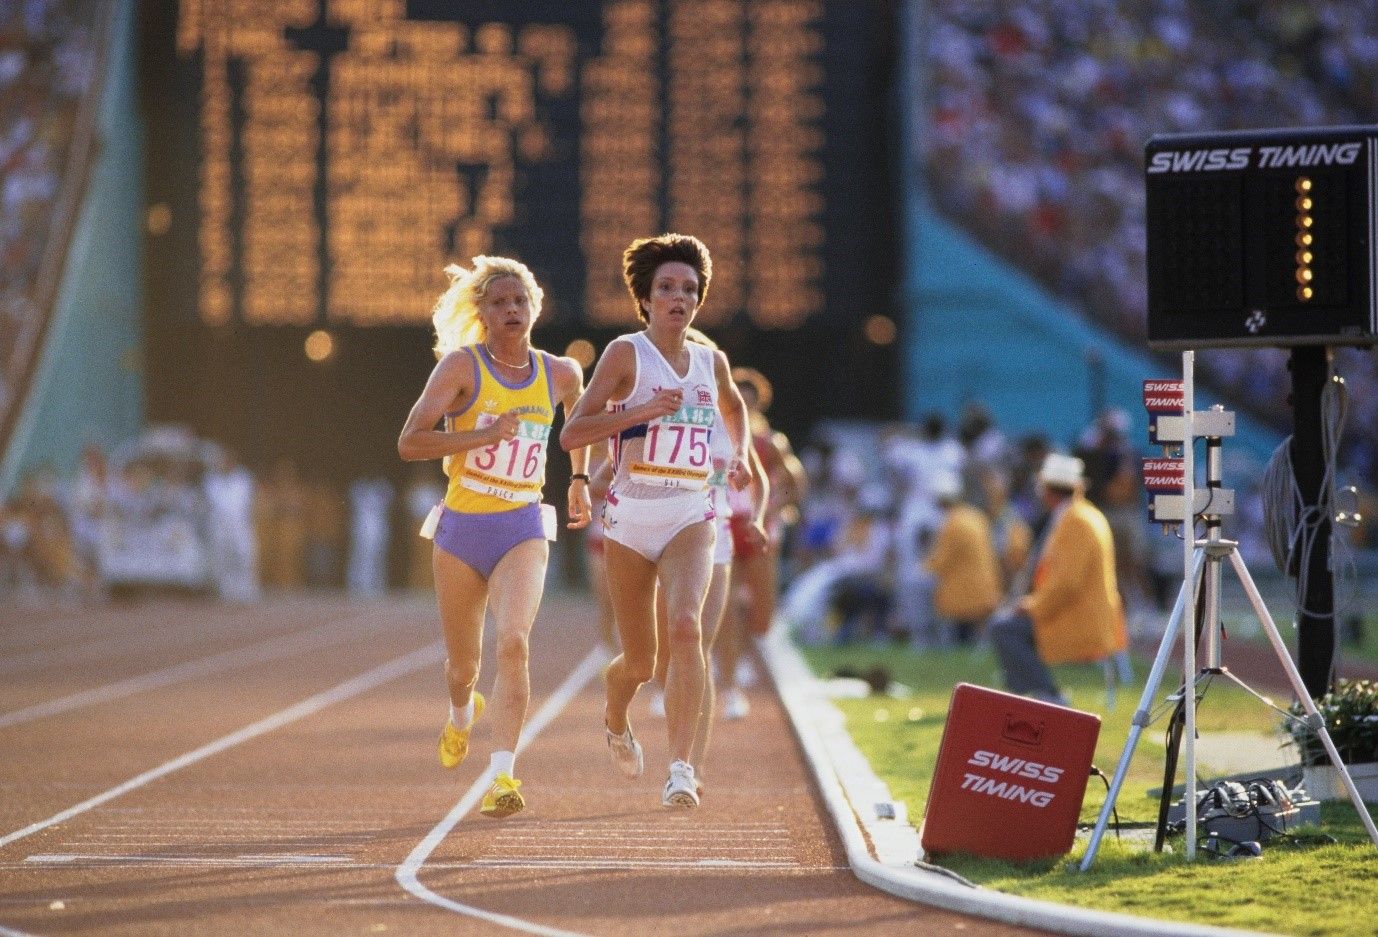 A group of women running on a track

Description automatically generated with medium confidence